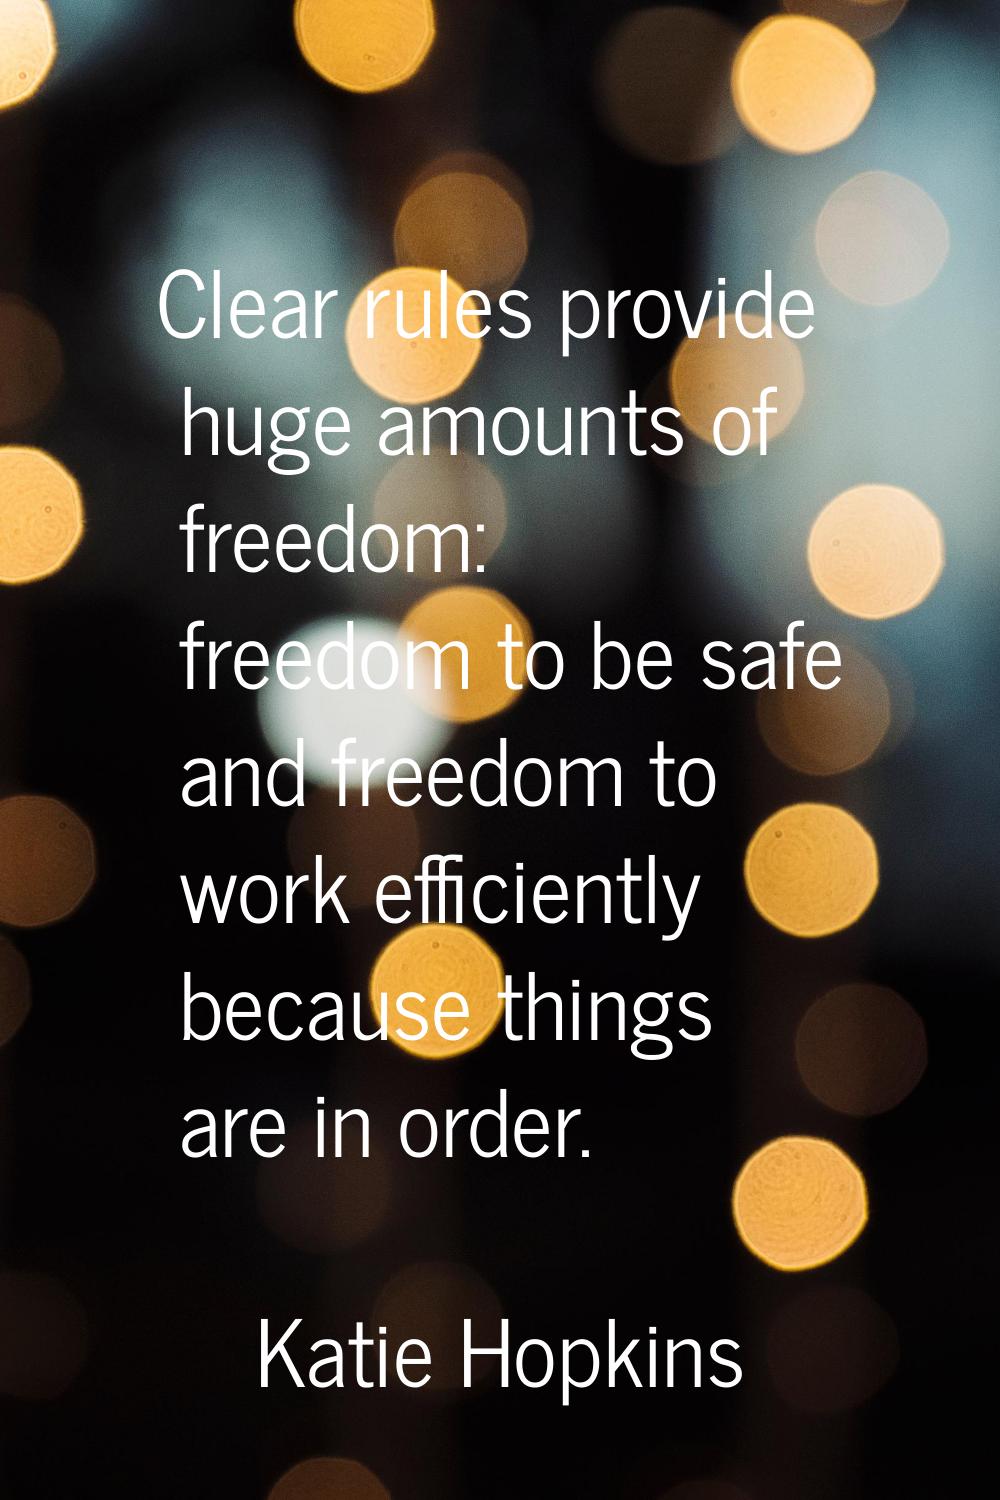 Clear rules provide huge amounts of freedom: freedom to be safe and freedom to work efficiently bec